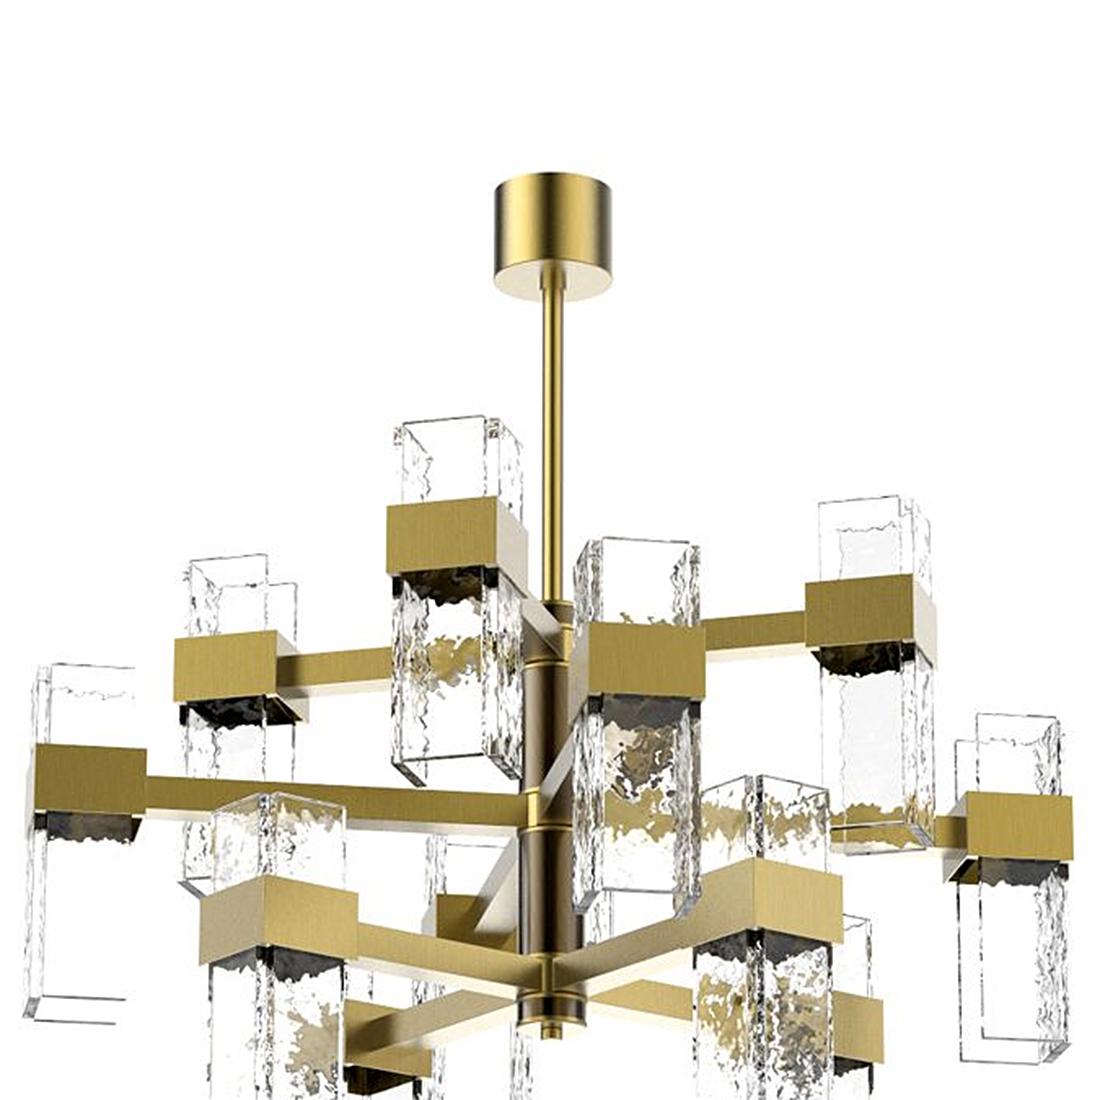 Chandelier Lewis with structure in solid brass in 
vintage bronzed matte finish. With 12 blown glass 
squared tubes. With 12 Led bulbs G9, Max 3 Watts. 
Bulbs not included.
Also available in table lamp and wall lamp Lewis.